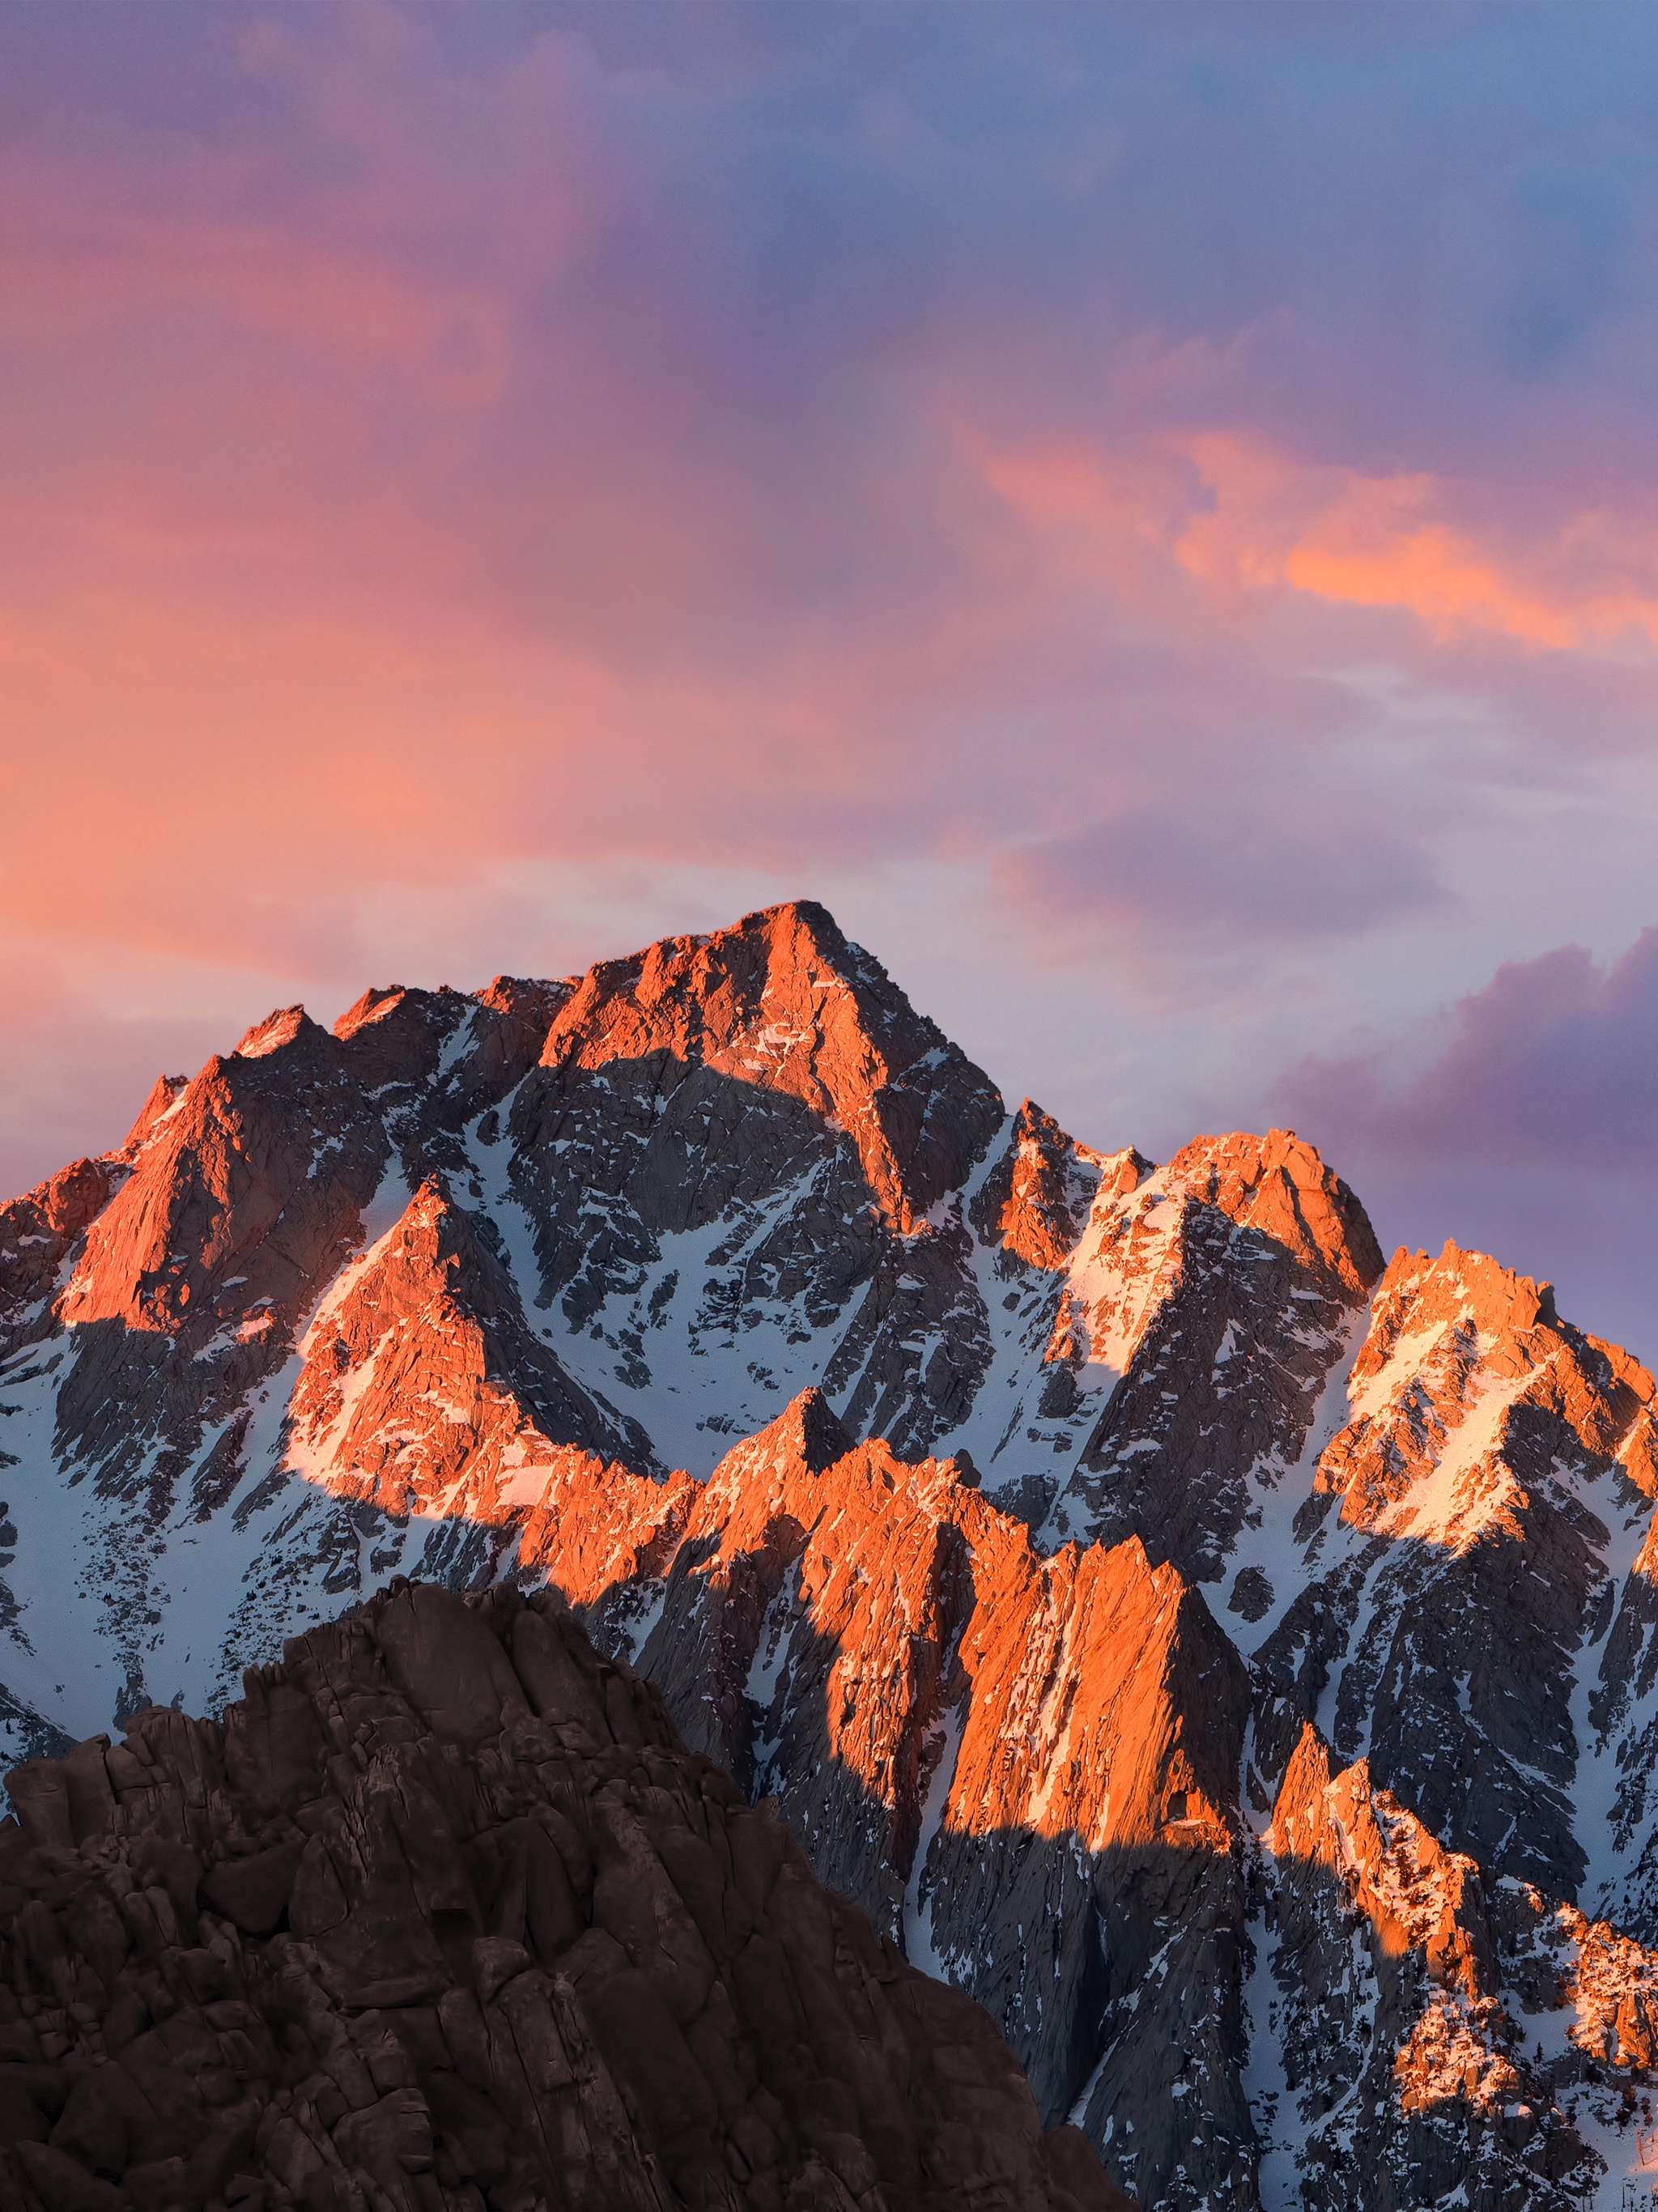 The New Macos Sierra Wallpaper For iPhone iPad And Desktop